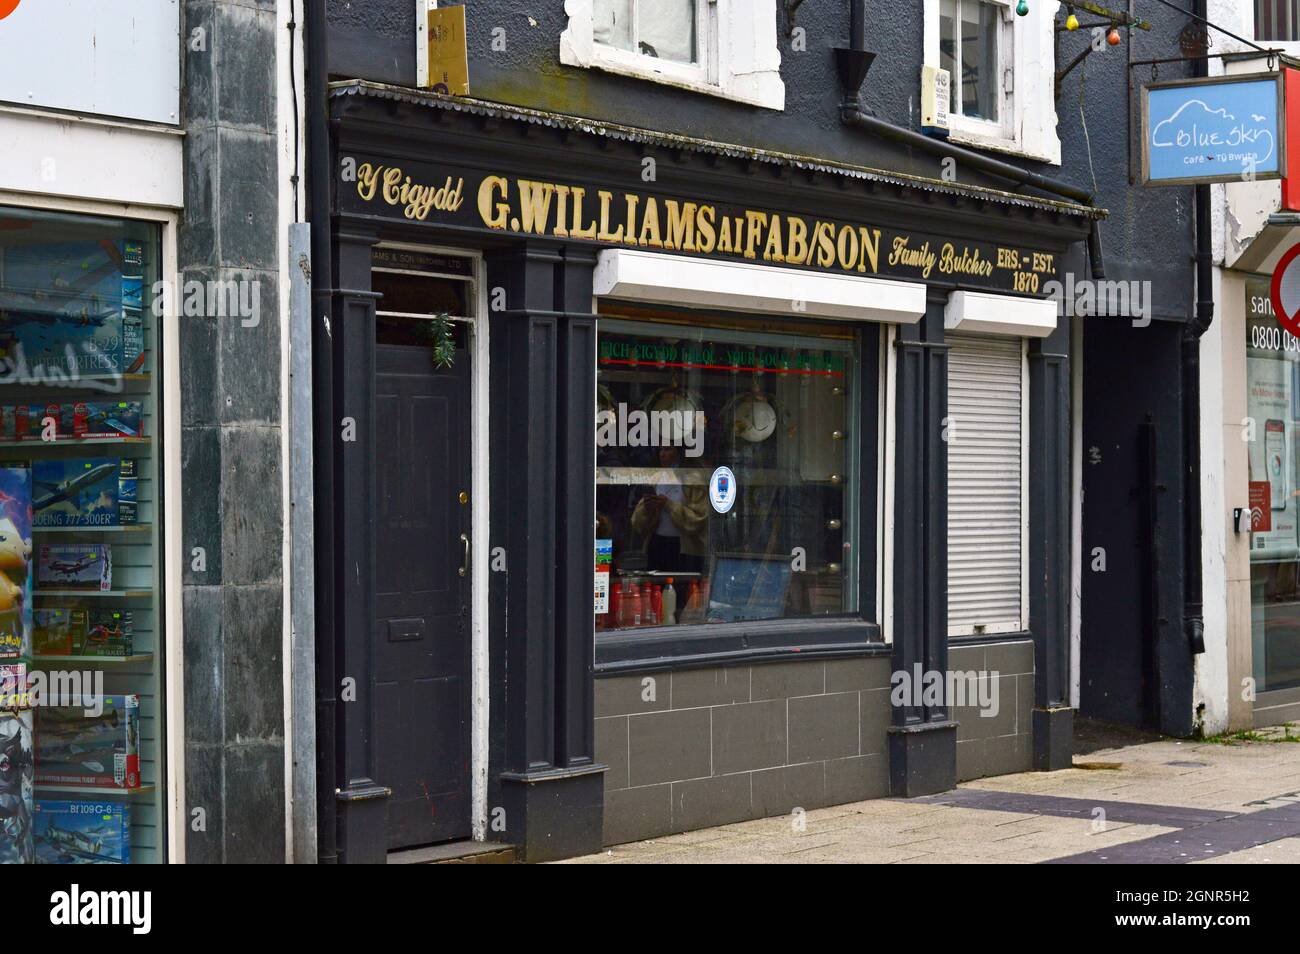 BANGOR, GWYNEDD.WALES. 06-26-21. Hight Street in the town centre. G. Willaims family butchers shop. Stock Photo